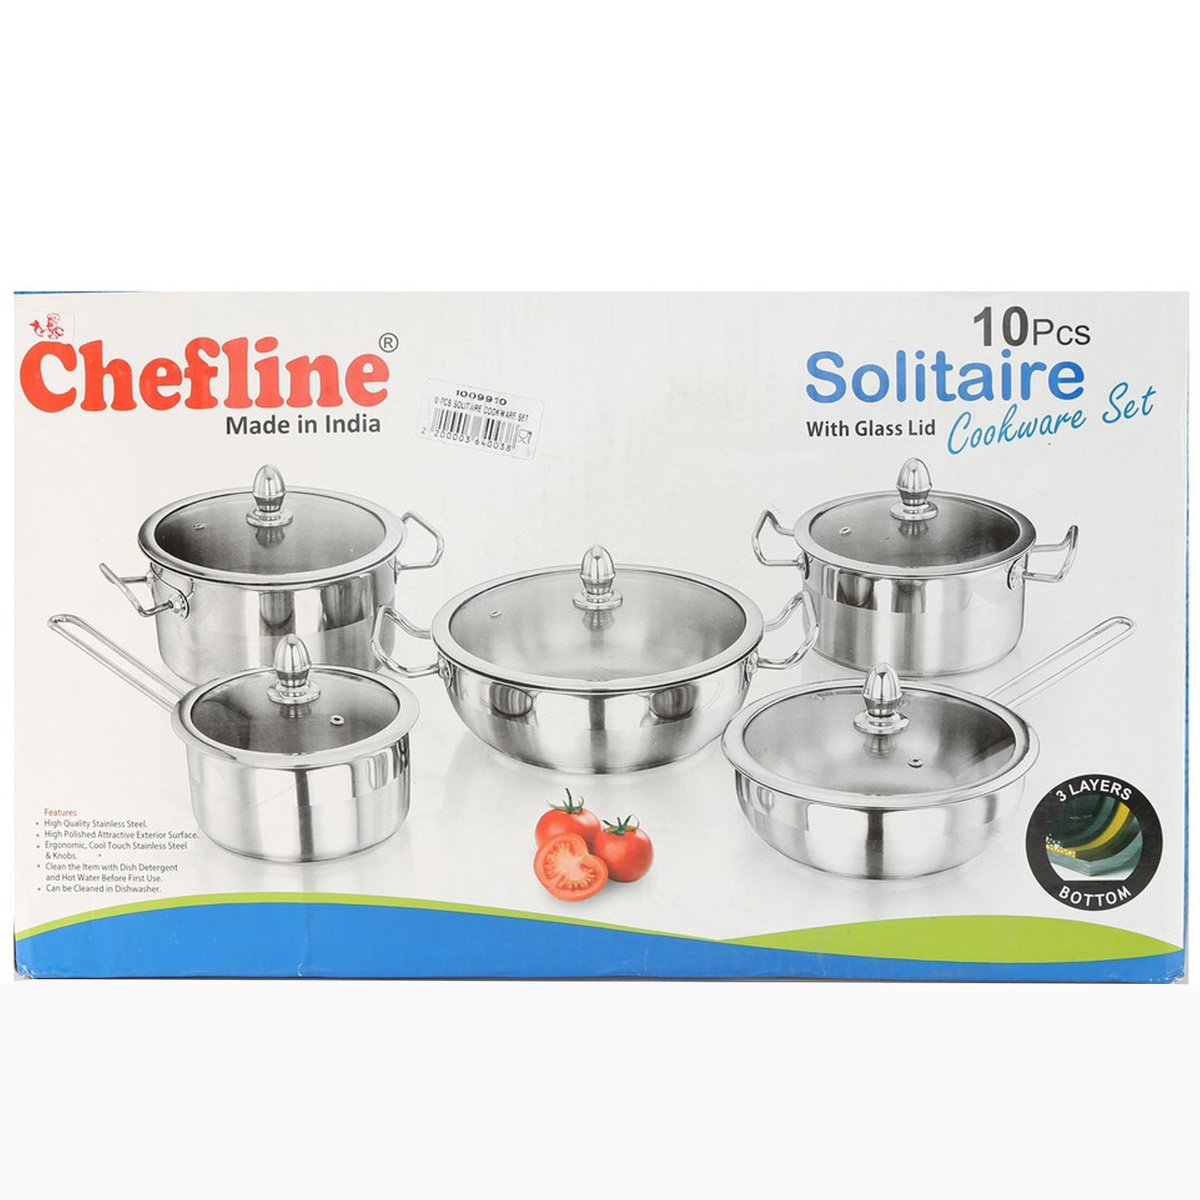 Chefline Solitaire Stainless Steel Cookware Set 10pcs